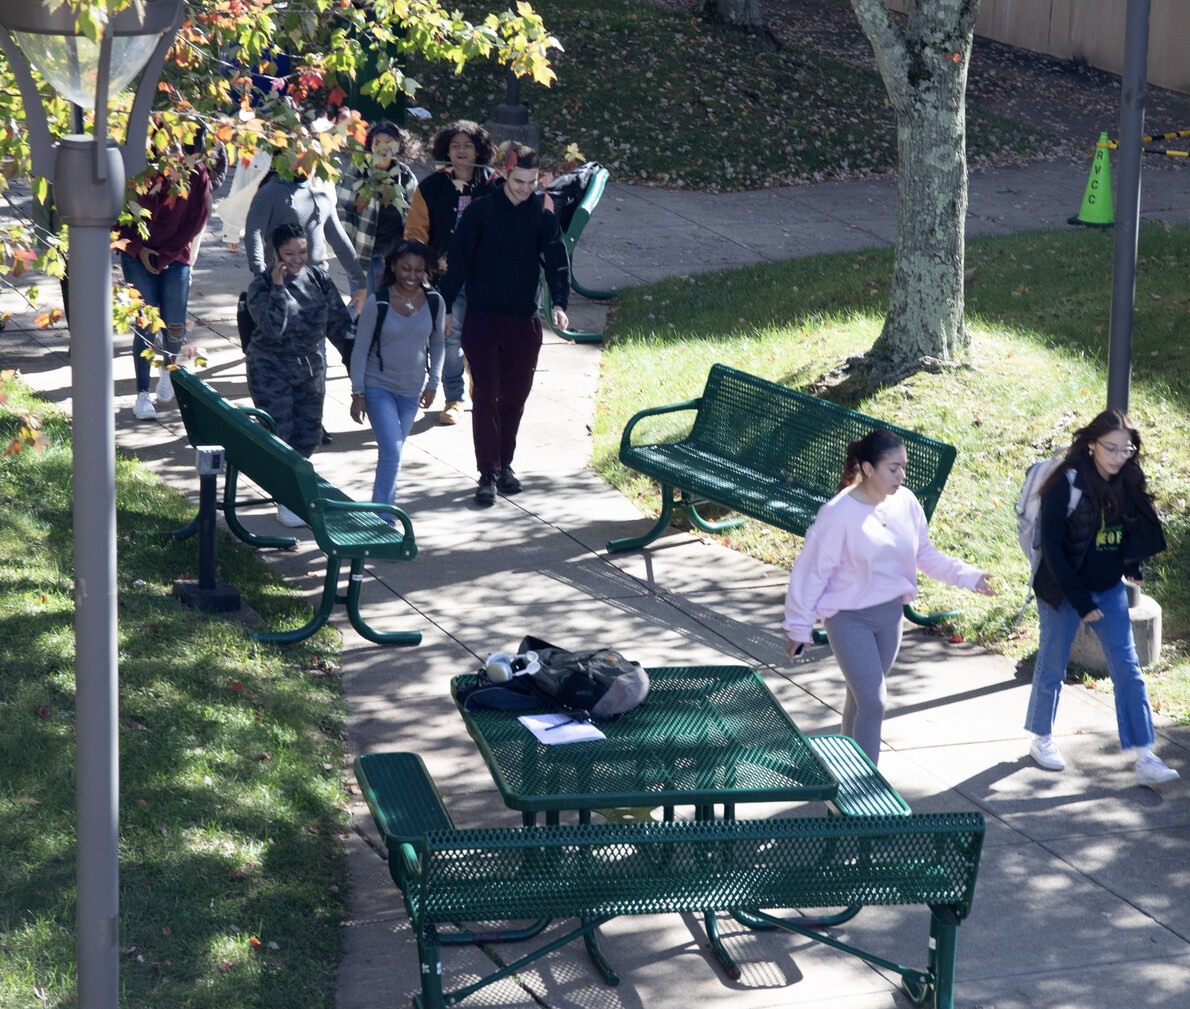 students walking near benches and picnic tables